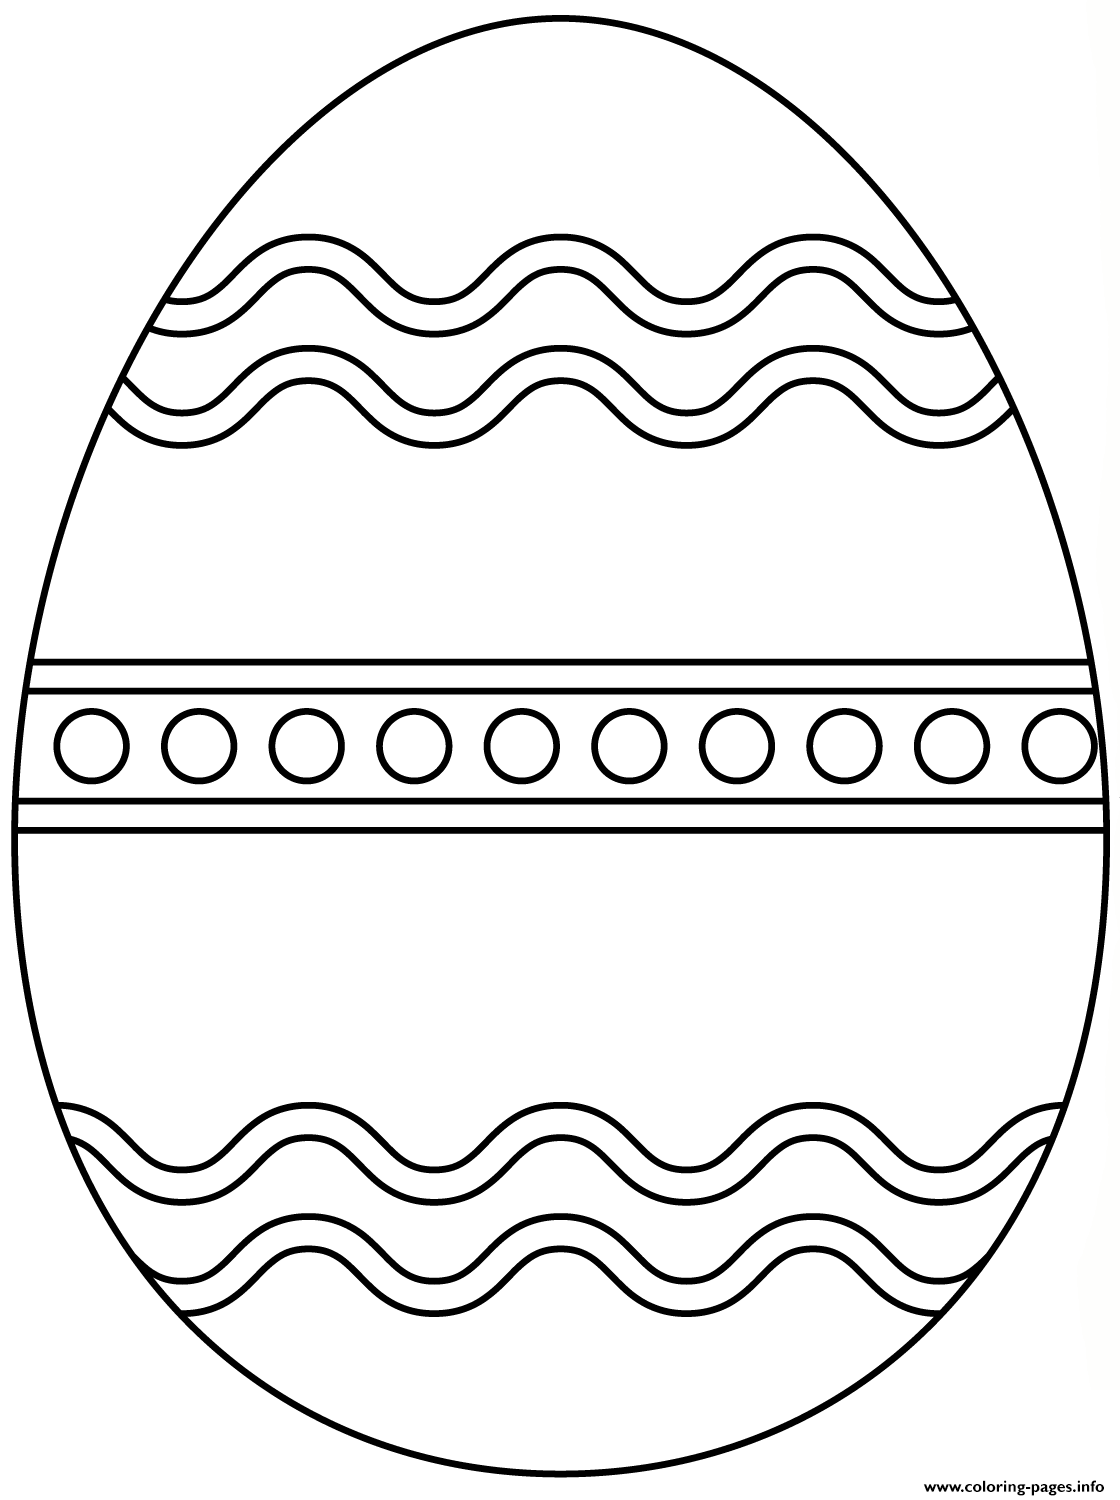 Easter Egg With Abstract Pattern 3 1 coloring